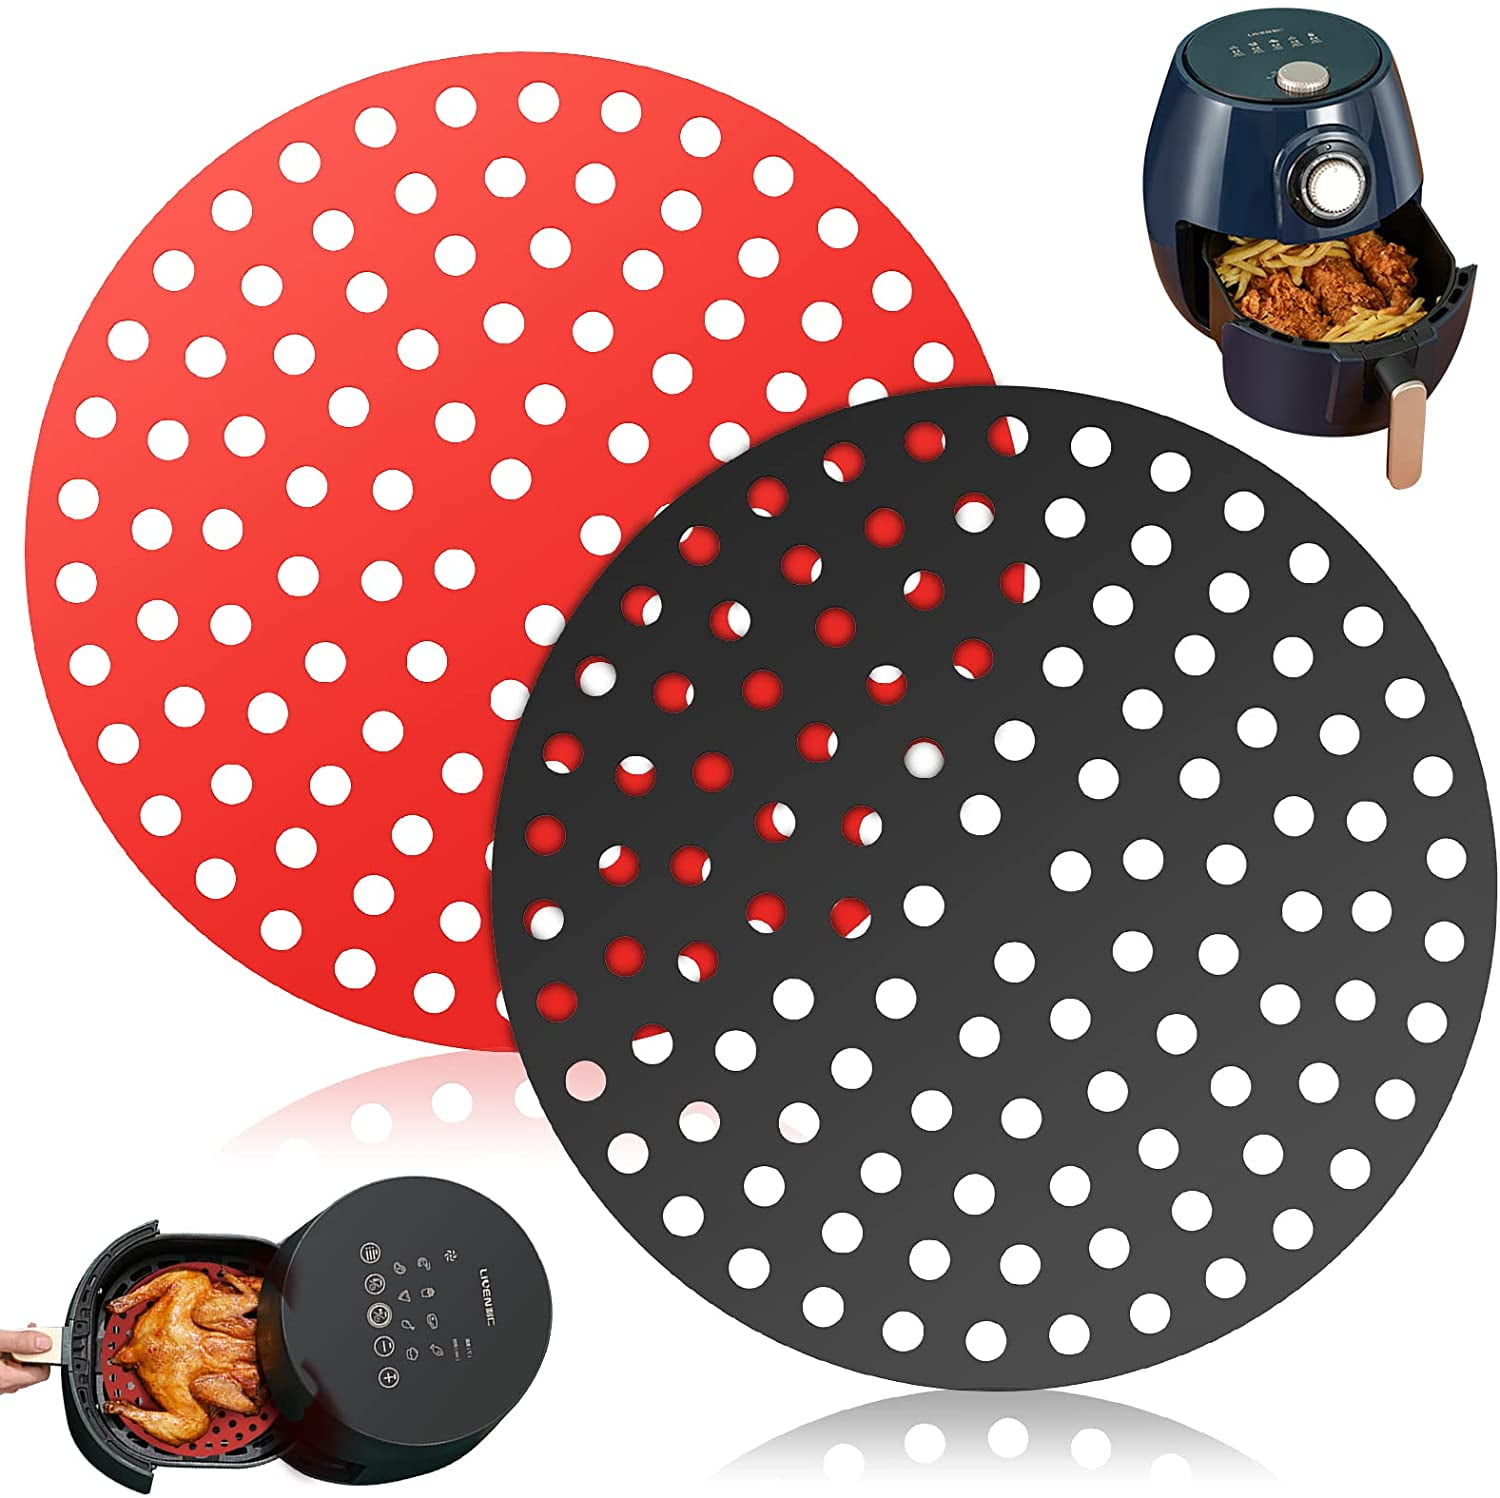 Nogis 2-Pack Reusable Air Fryer Liners, 8 Inch Round Air Fryer Basket Mats,  Non-Stick Silicone Air Fryer Accessories Compatible with NINJA, INSTANT  POT, GOURMIA, POWER XL, CHEFMAN, DASH and More 